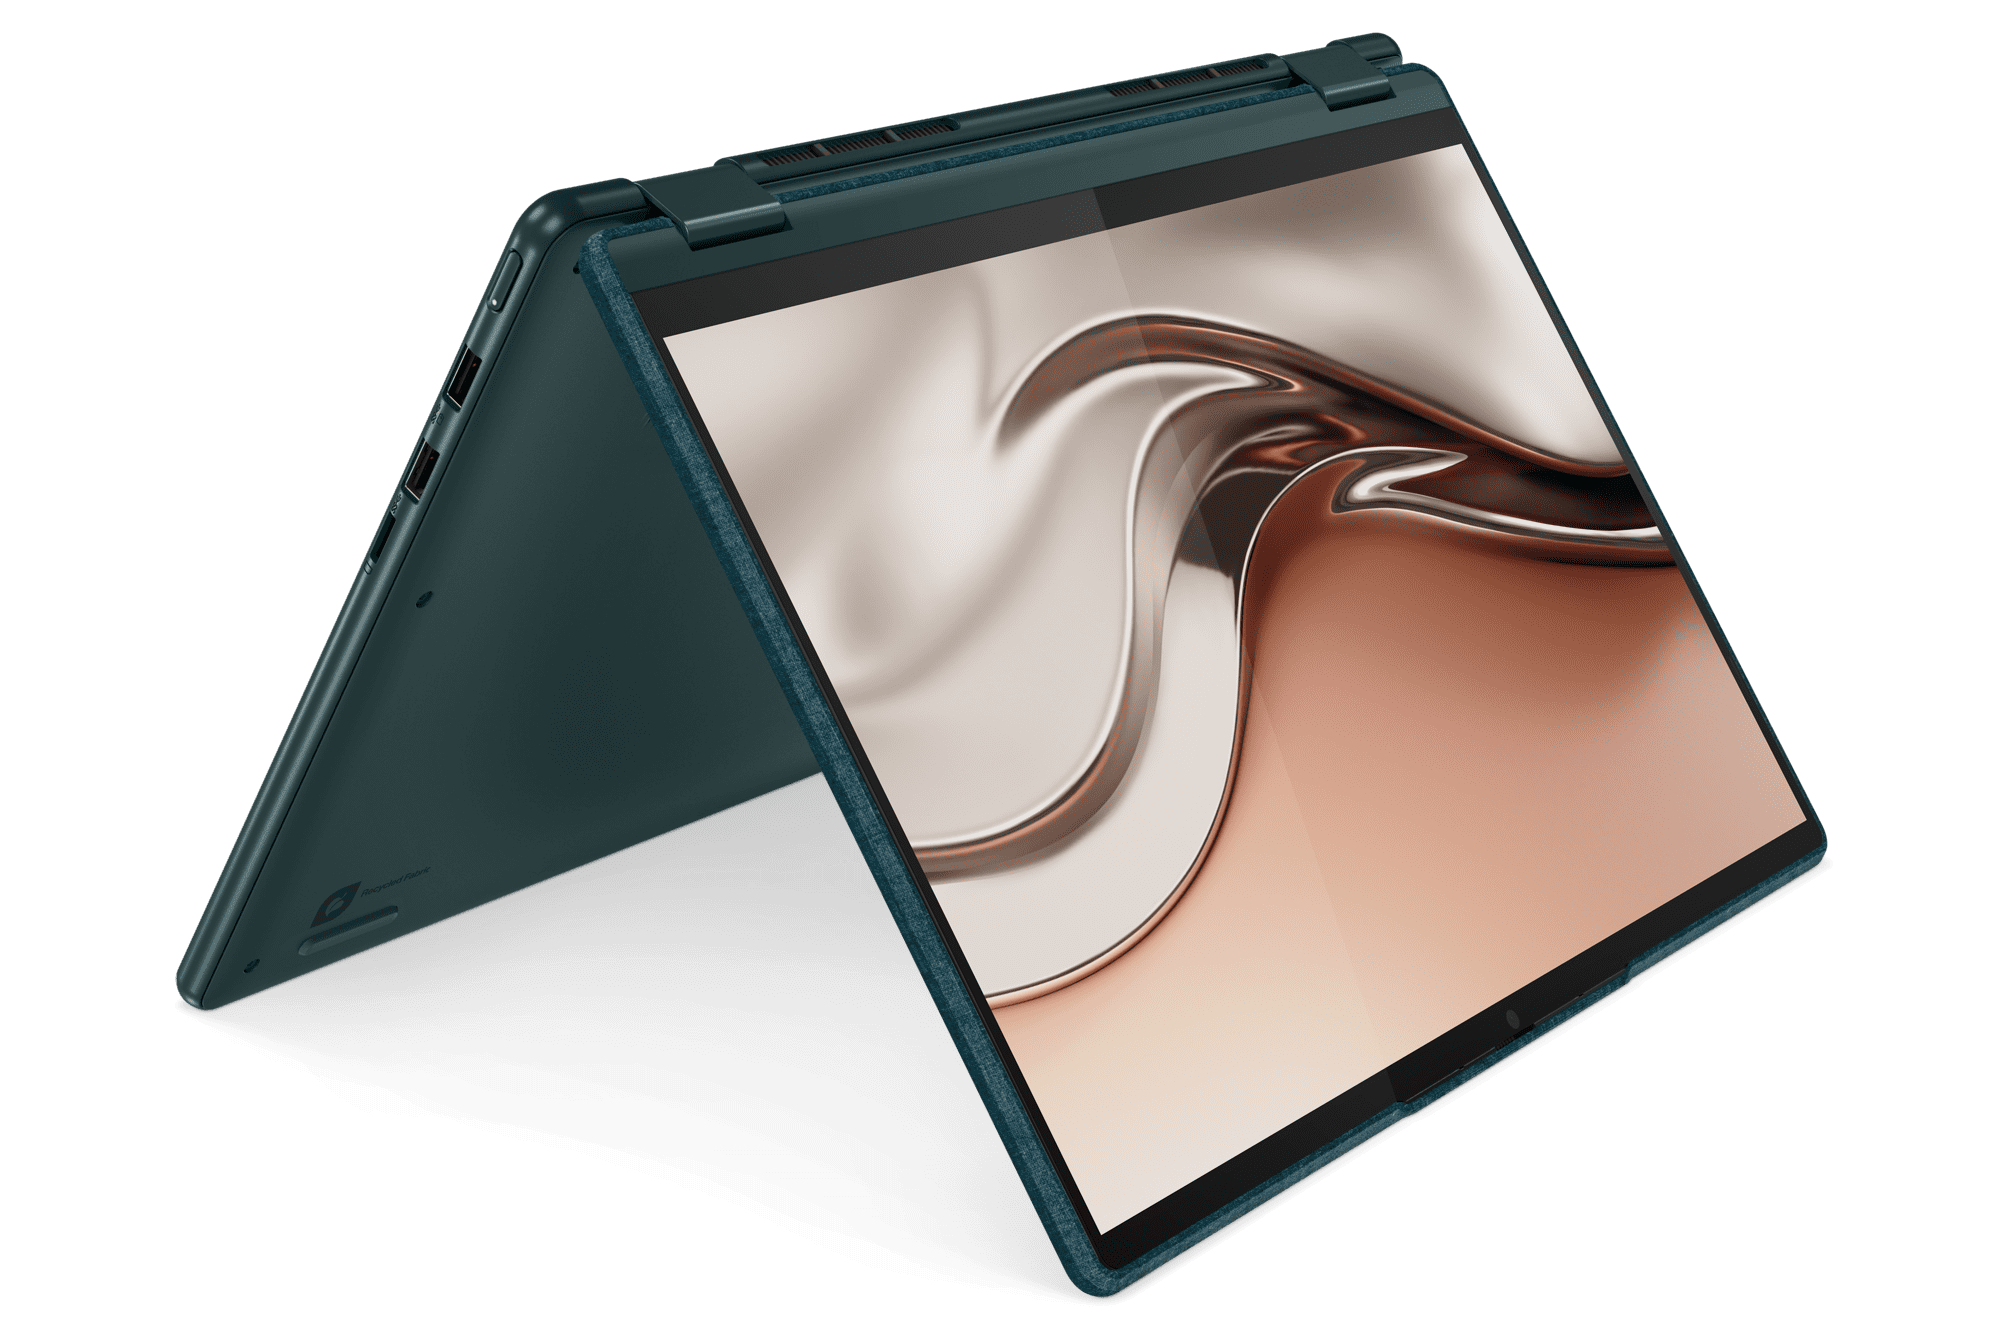 The Yoga 6 with fabric-wrapped cover in Dark Teal is made with recycled water bottles and recycled aluminum